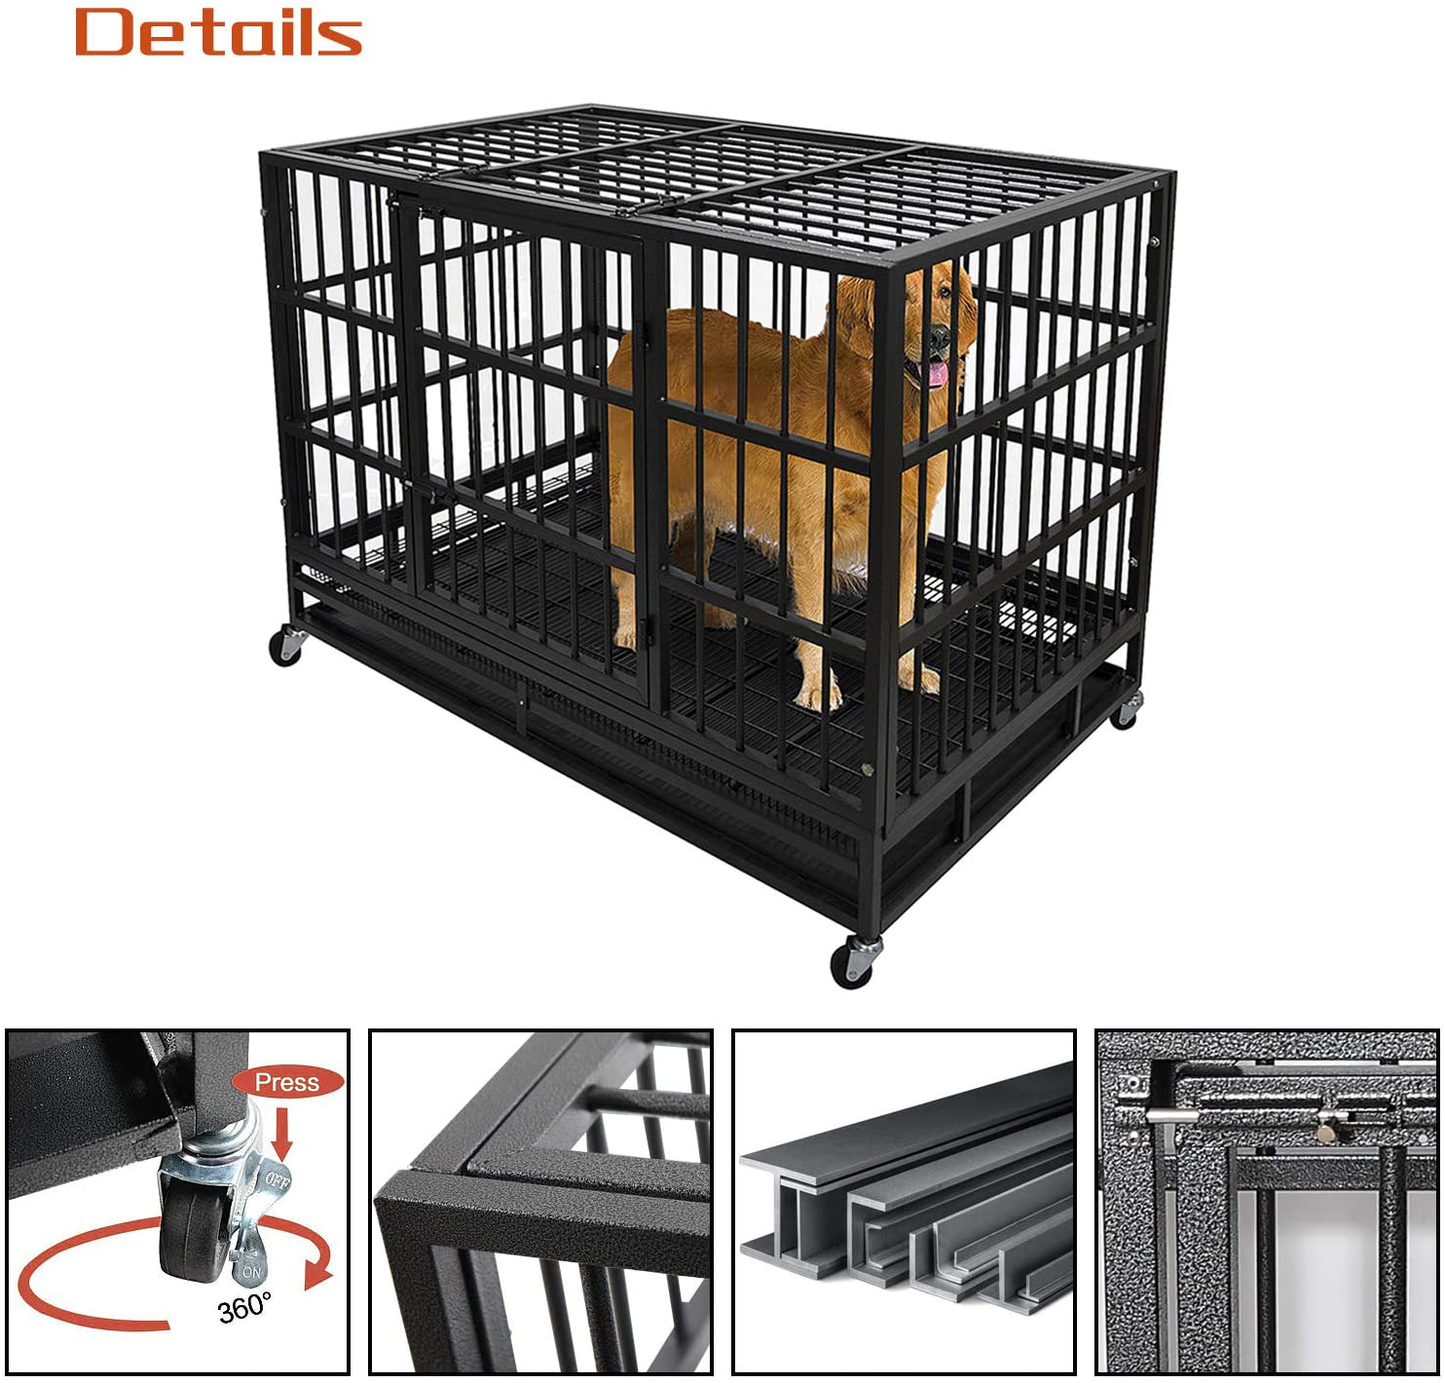 Otaid 48 Inch Heavy Duty Indestructible Dog Crate Cage Kennel with Wheels, High Anxiety Dog Crate, Sturdy Locks Design, Double Door and Removable Tray Design, Extra Large XL XXL Dog Crate.